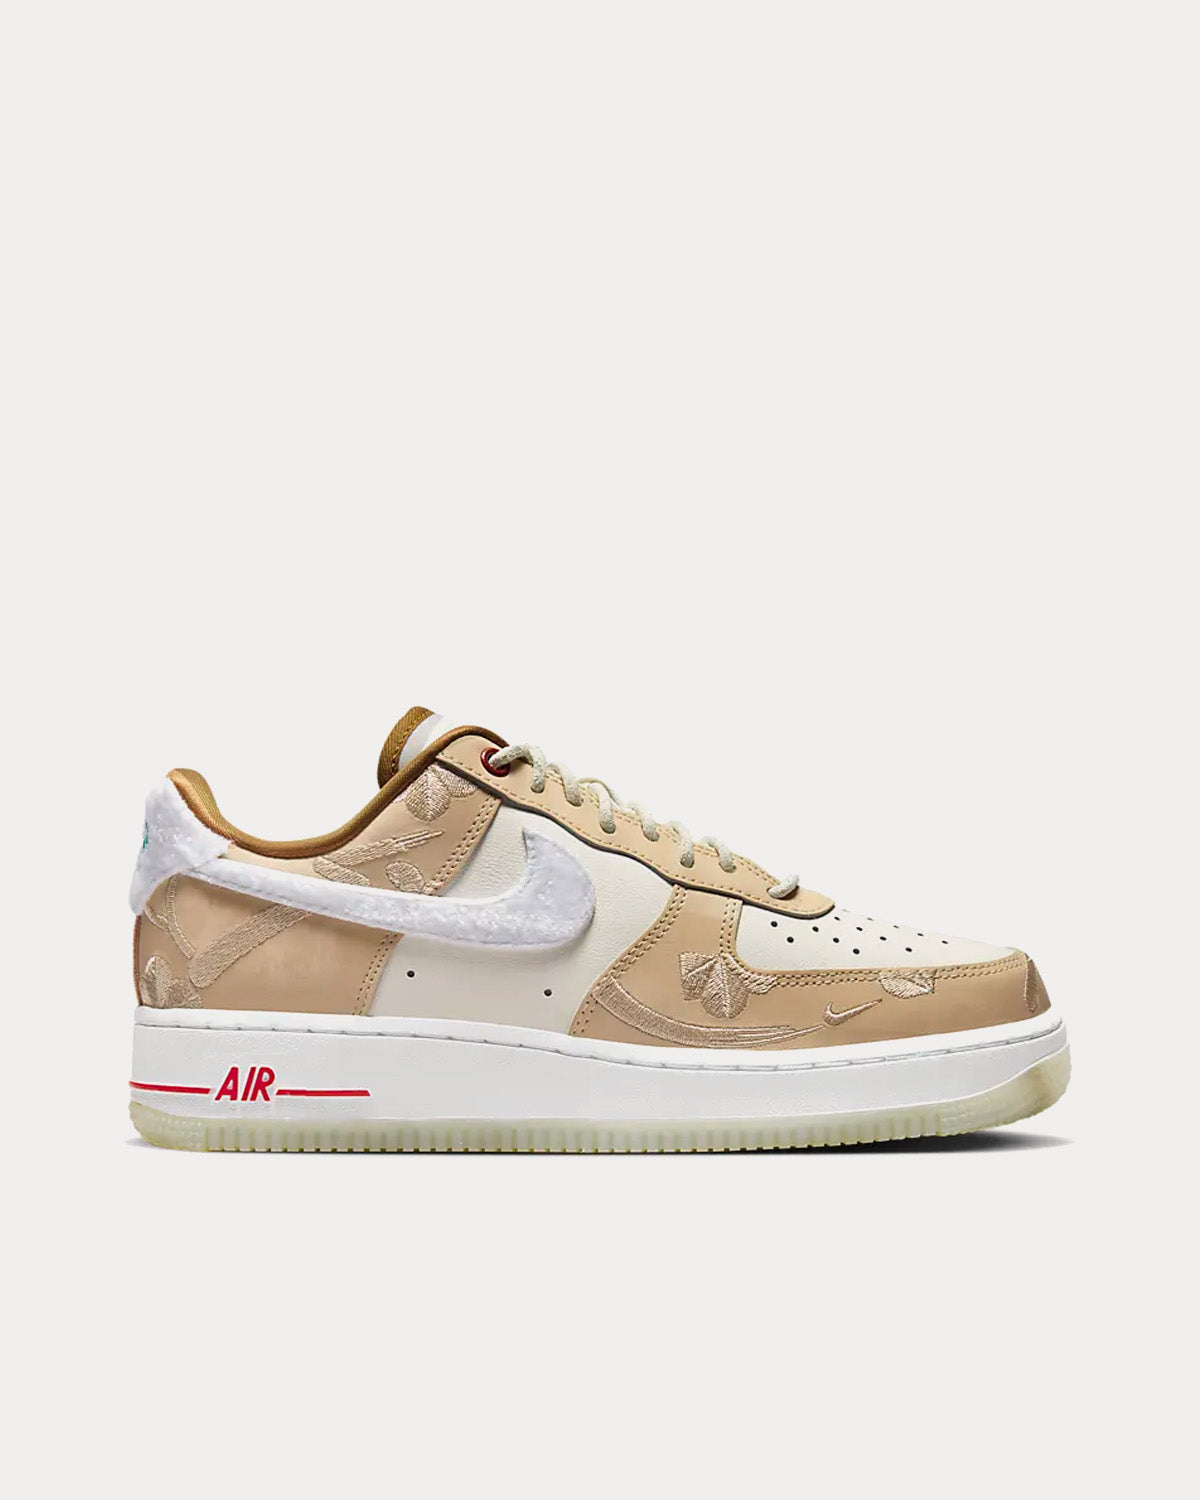 Nike - Air Force 1 '07 LX Sail / White / Sand Drift / Photon Dust Low Top Sneakers